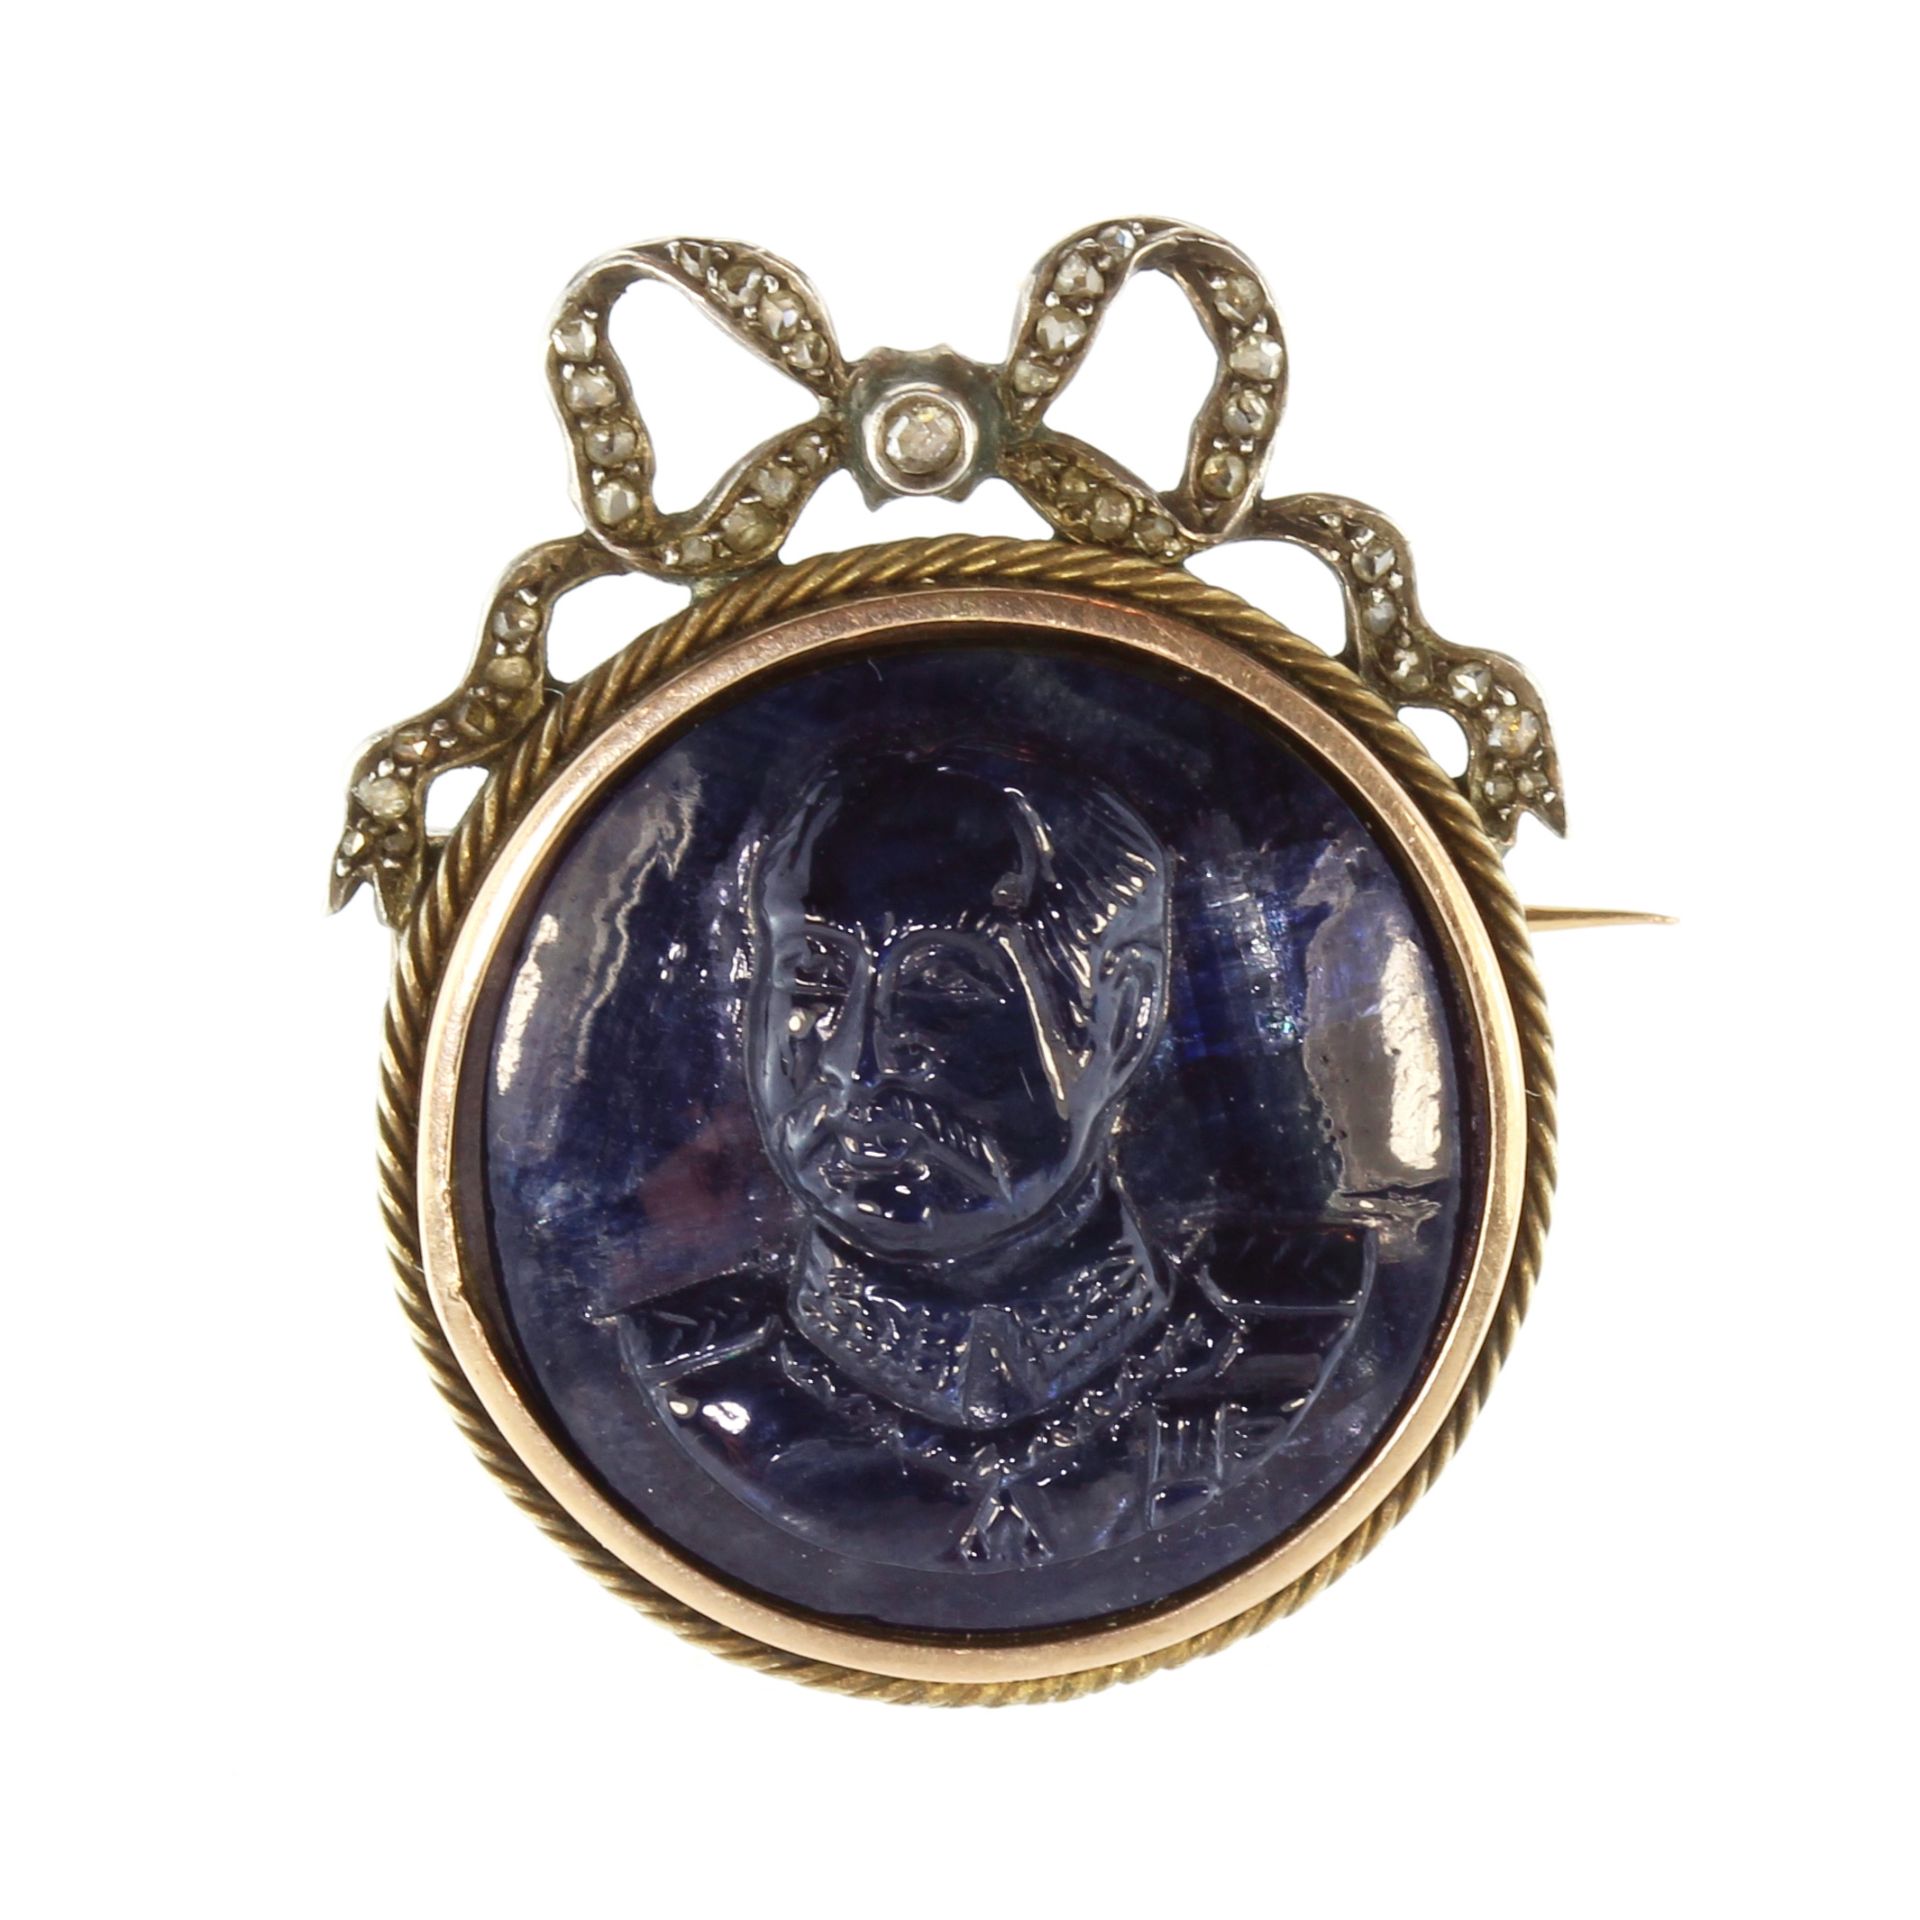 A French sapphire cameo and diamond brooch in gold and silver set with a large, circular carved blue